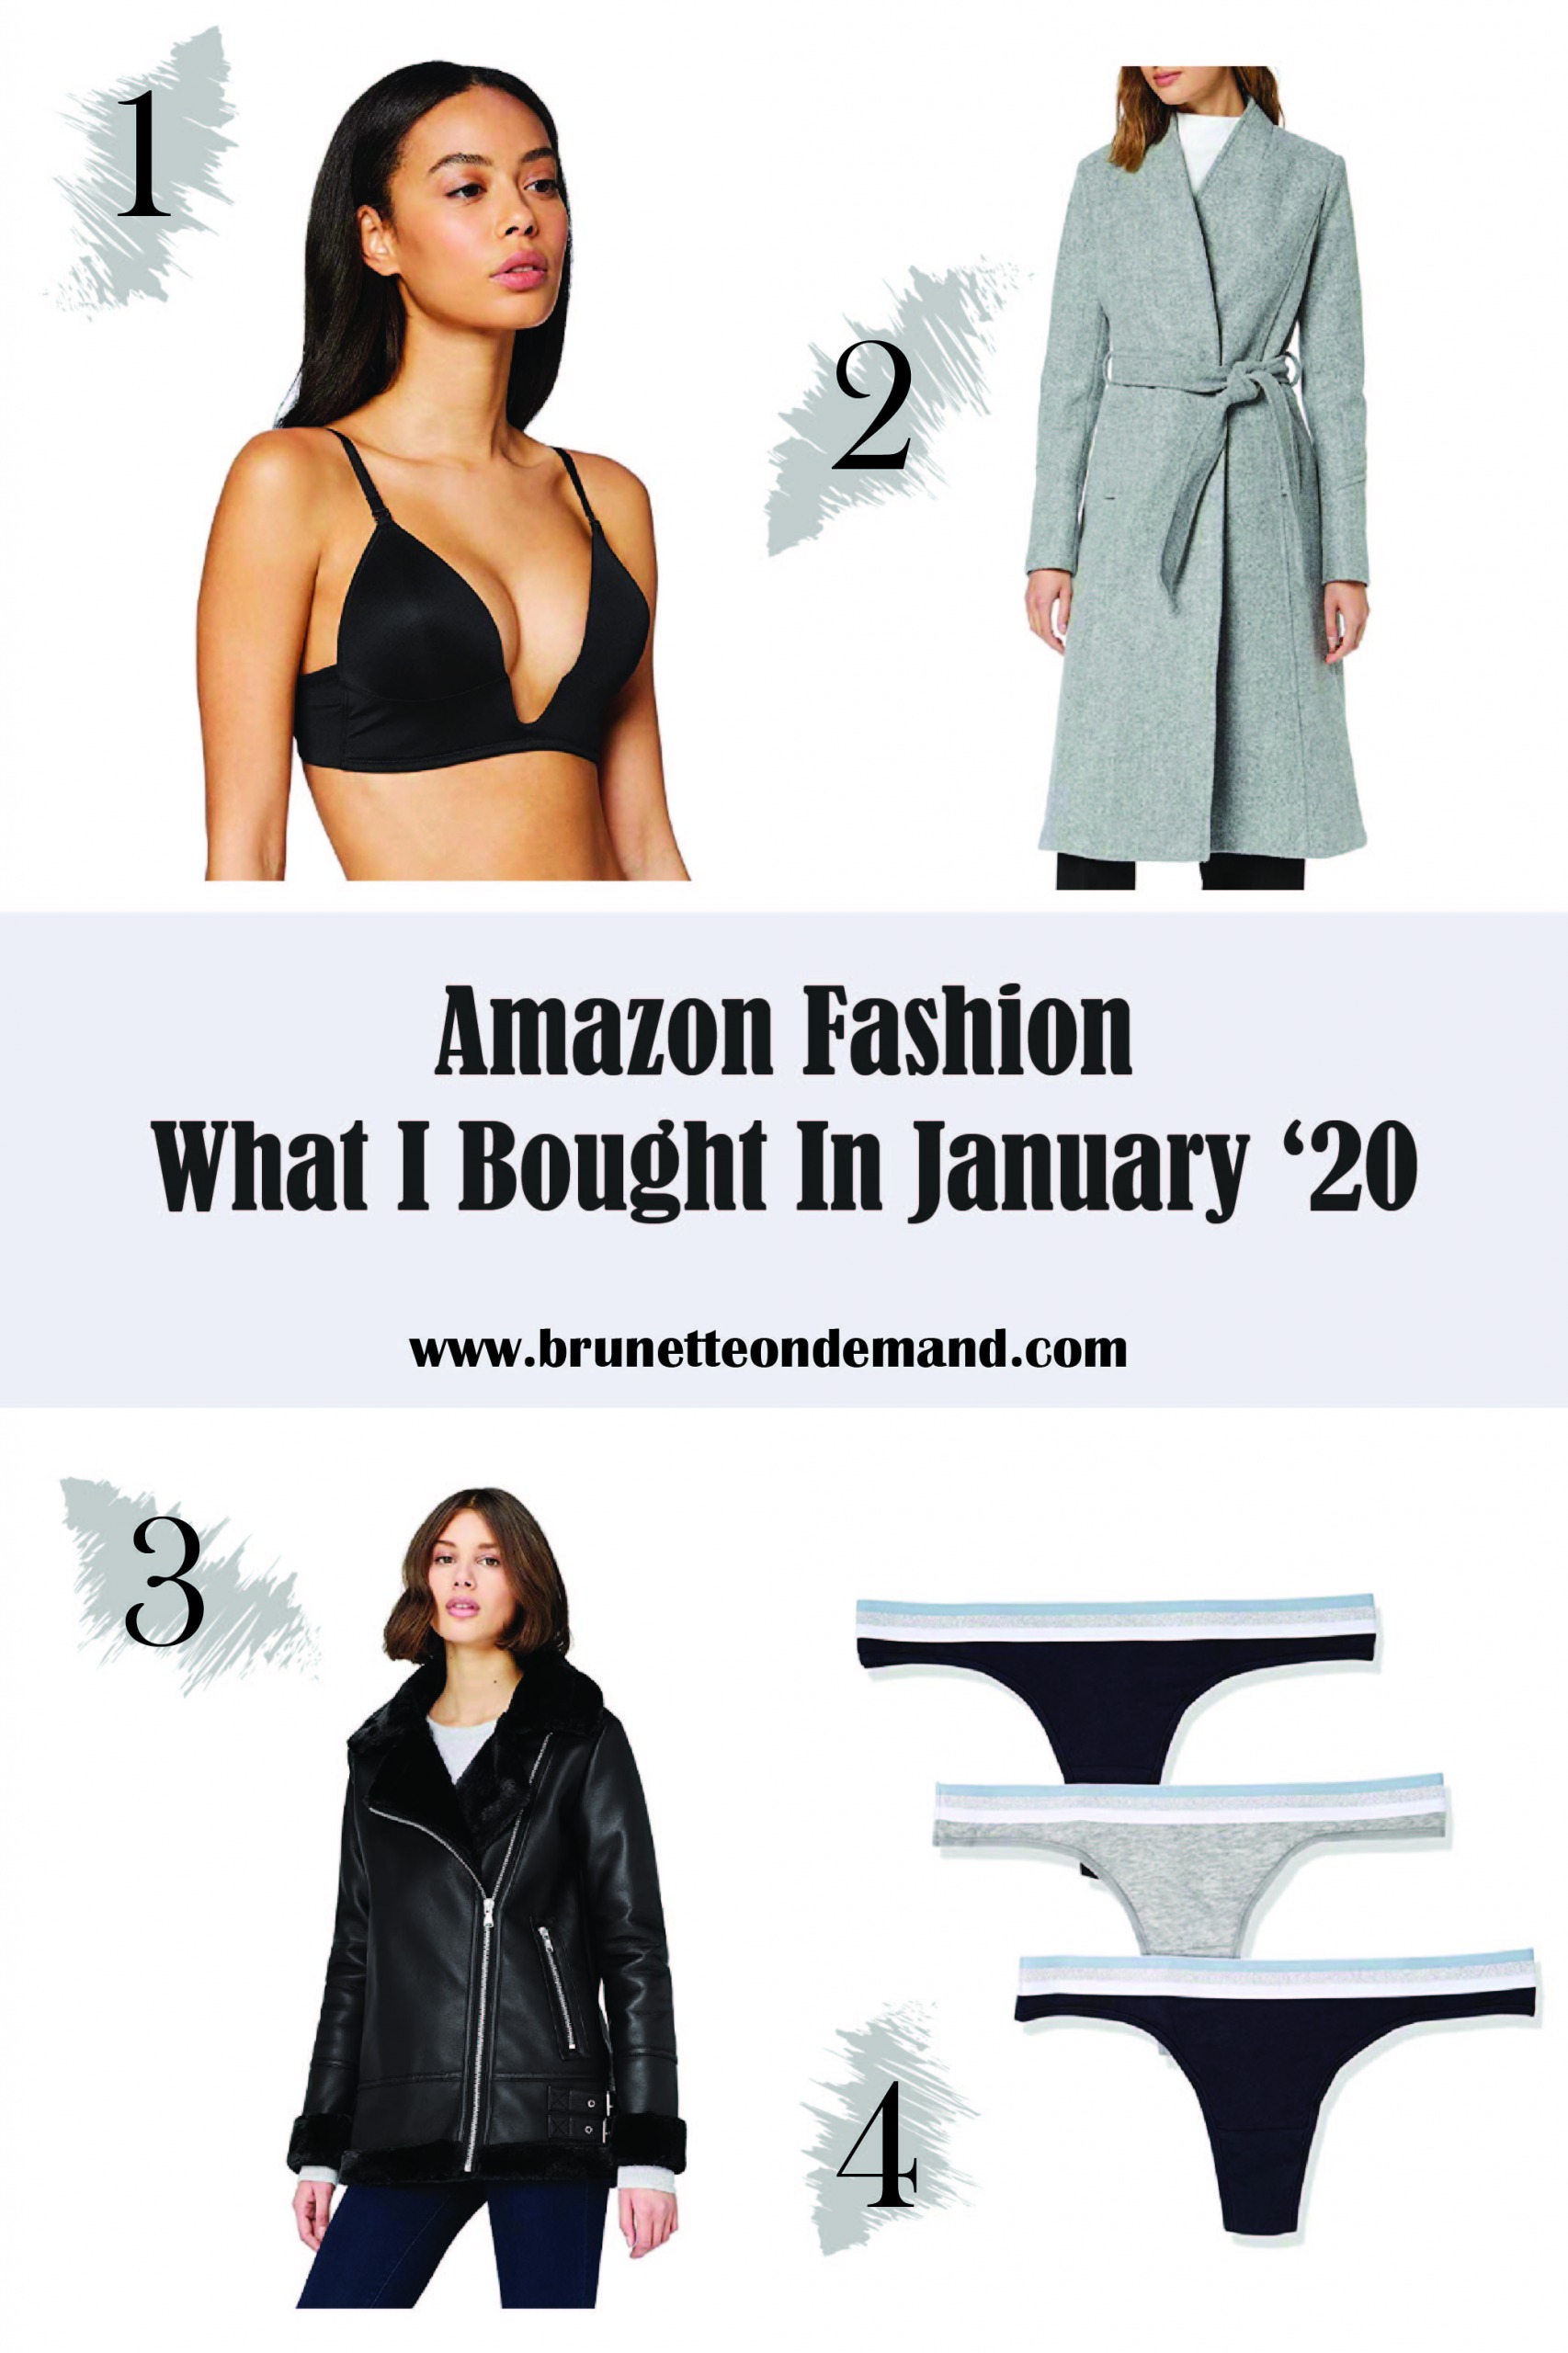 Amazon Fashion What I Bought In January '20